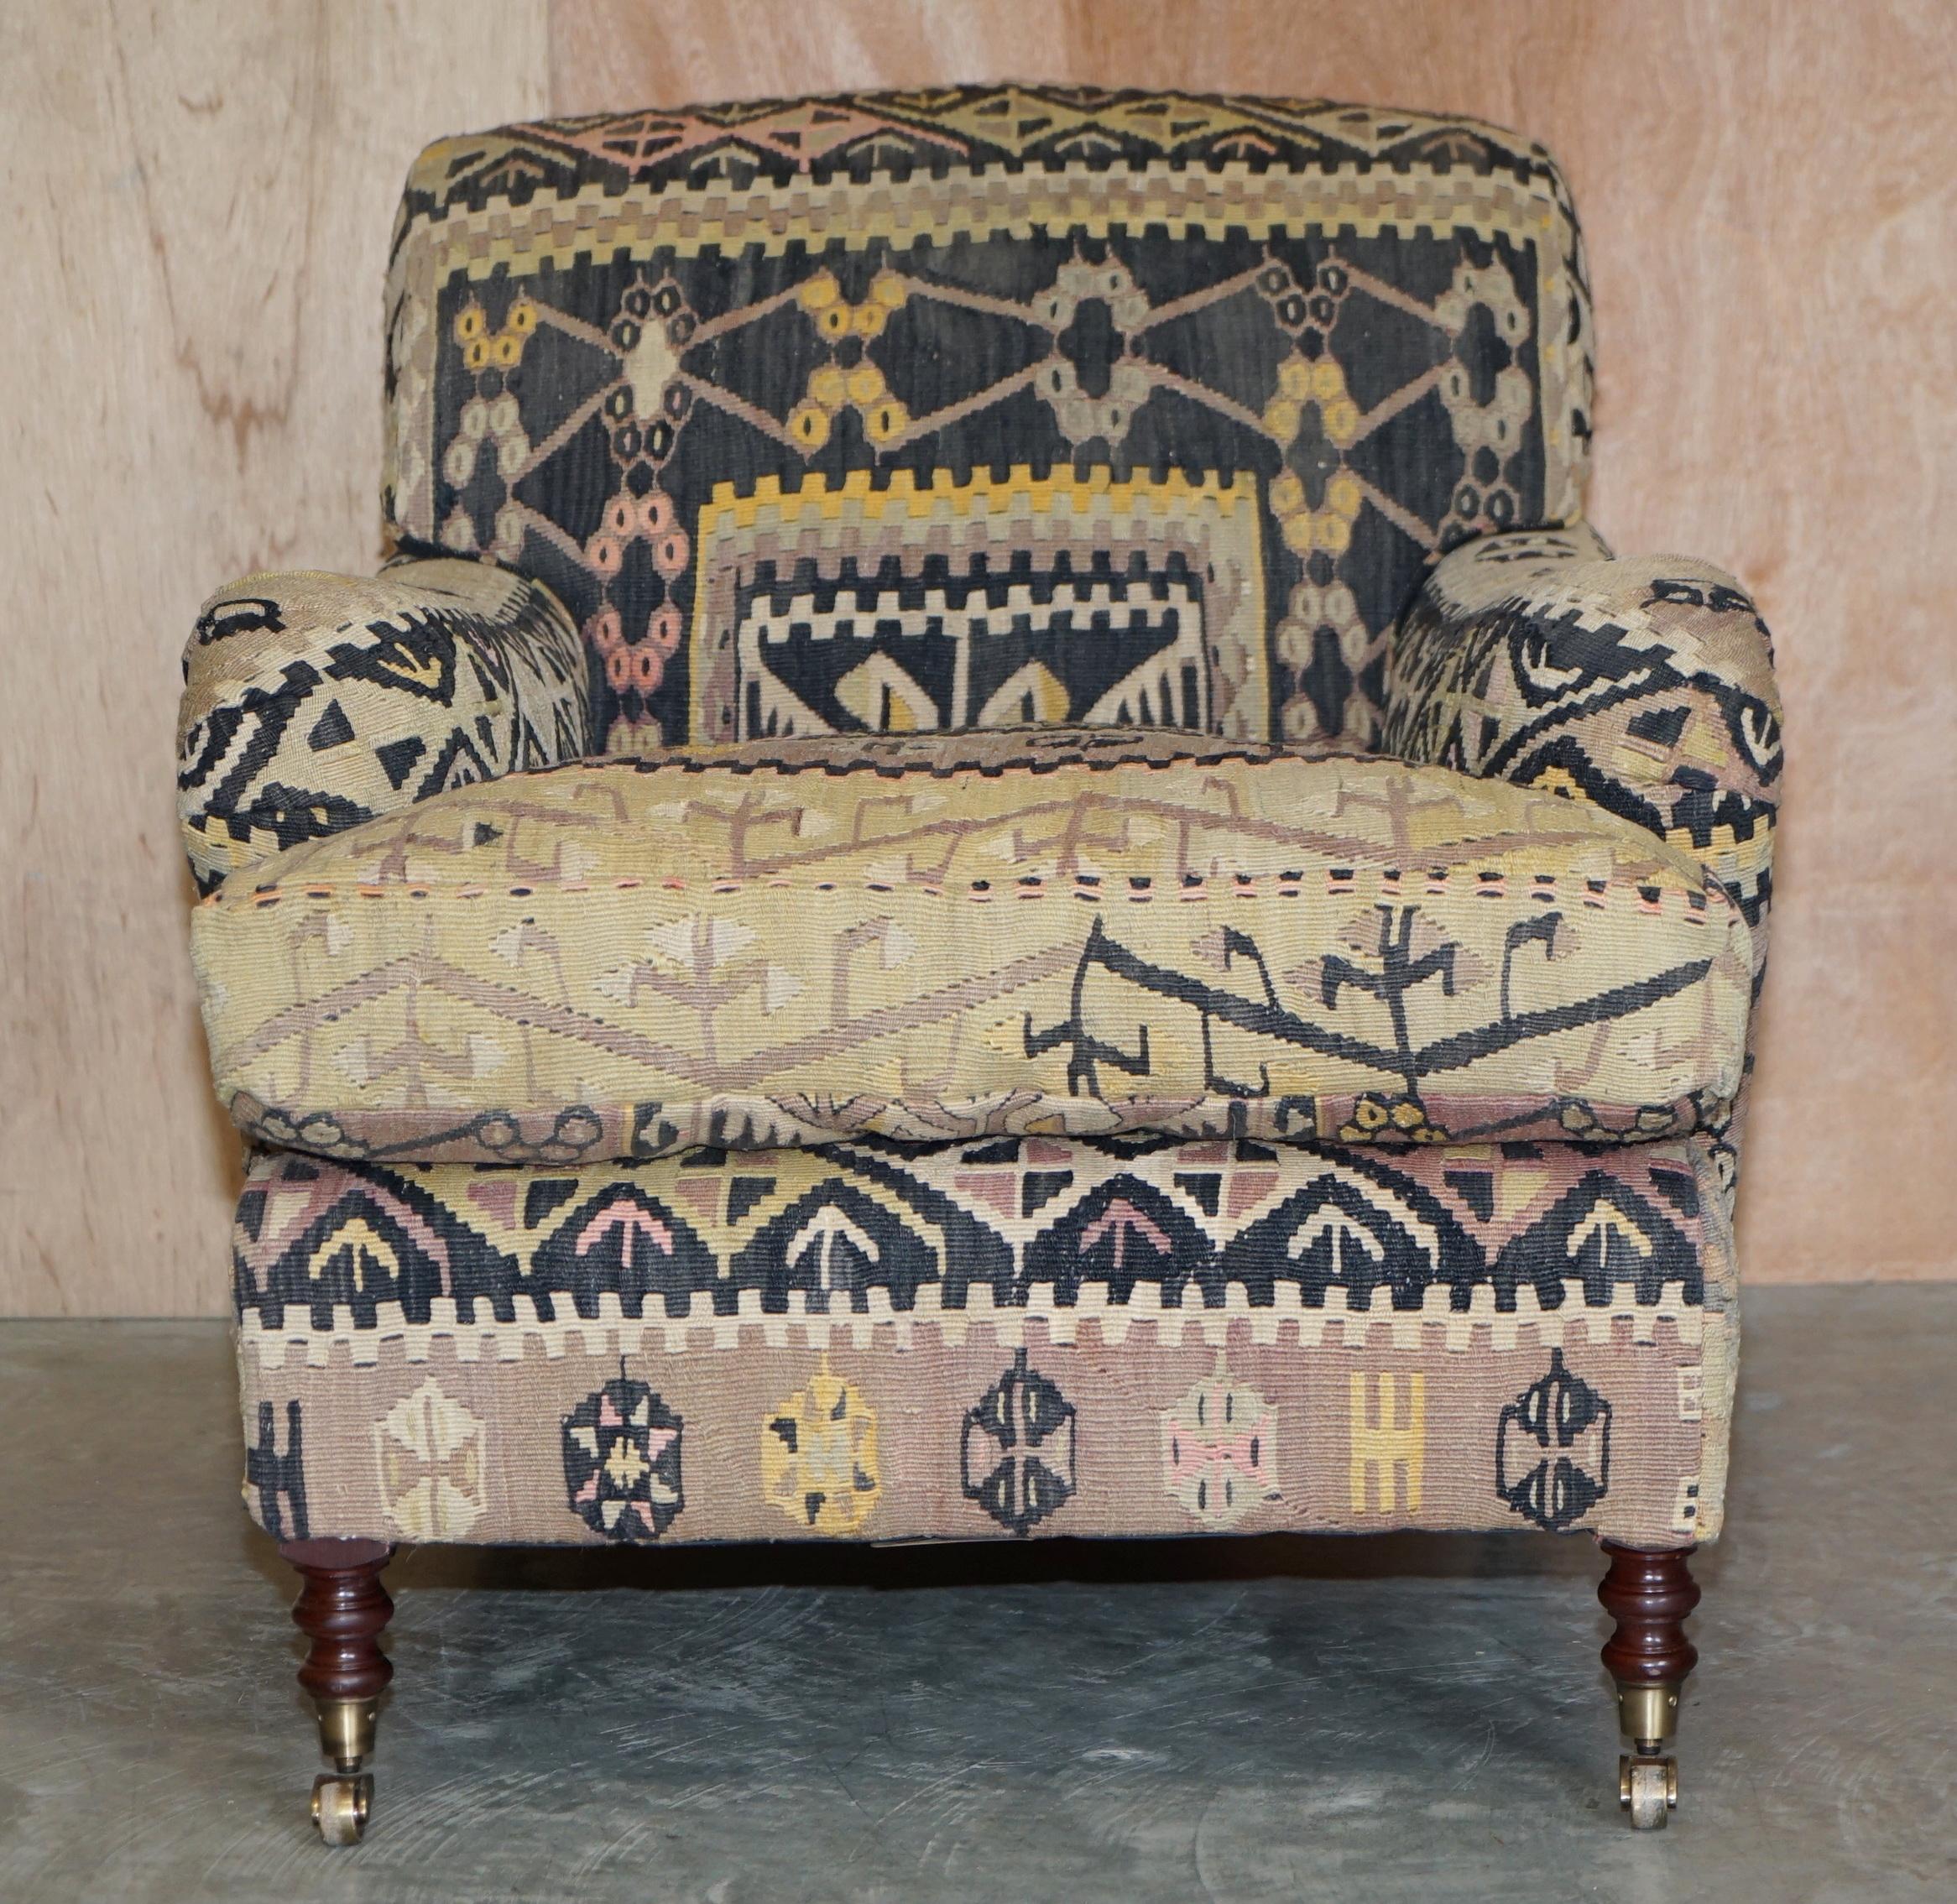 We are delighted to offer for sale this sublime and highly collectable (part of a suite) New Old Stock George Smith Signature Scroll Arm Aztec Kilim Armchair with oversized feather filled cushion. 

This chair is as mentioned part of a suite, I